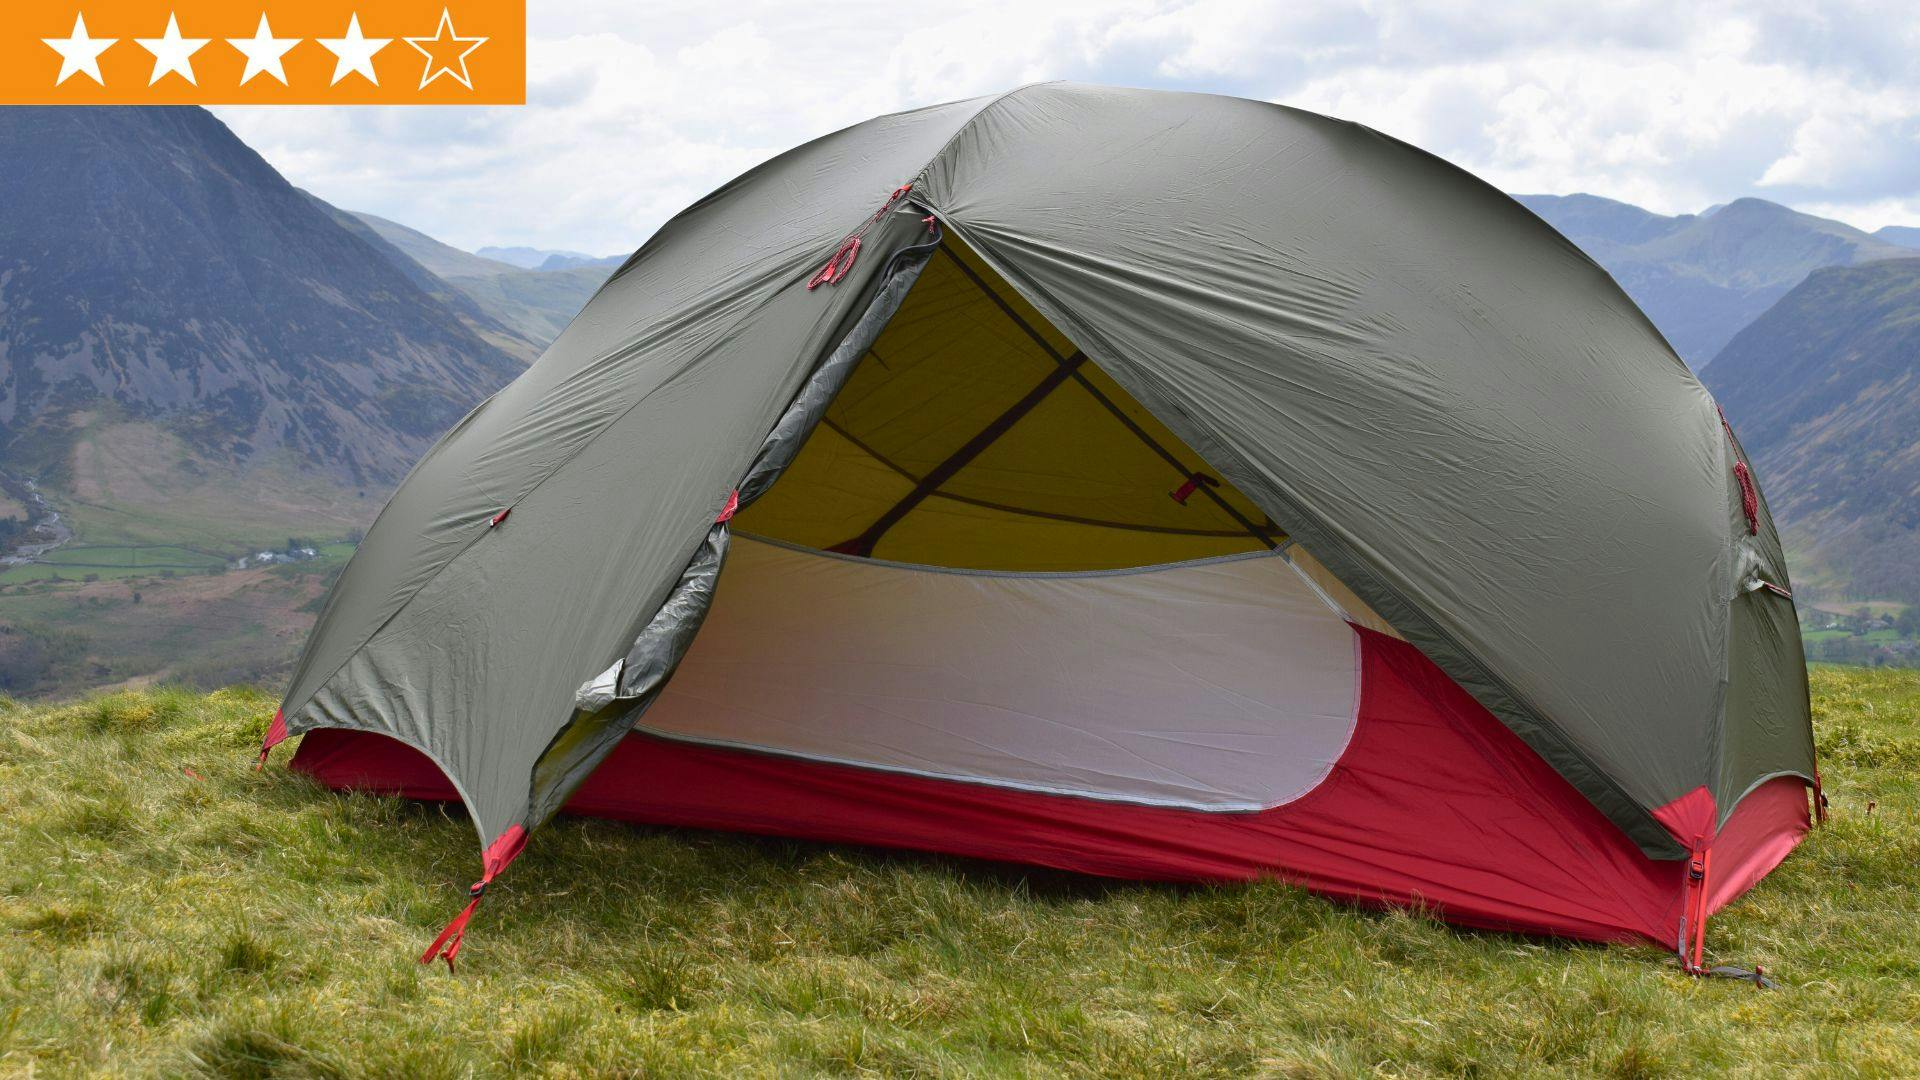 MSR Hubba Hubba NX 2-Person Backpacking Tent tested and reviewed